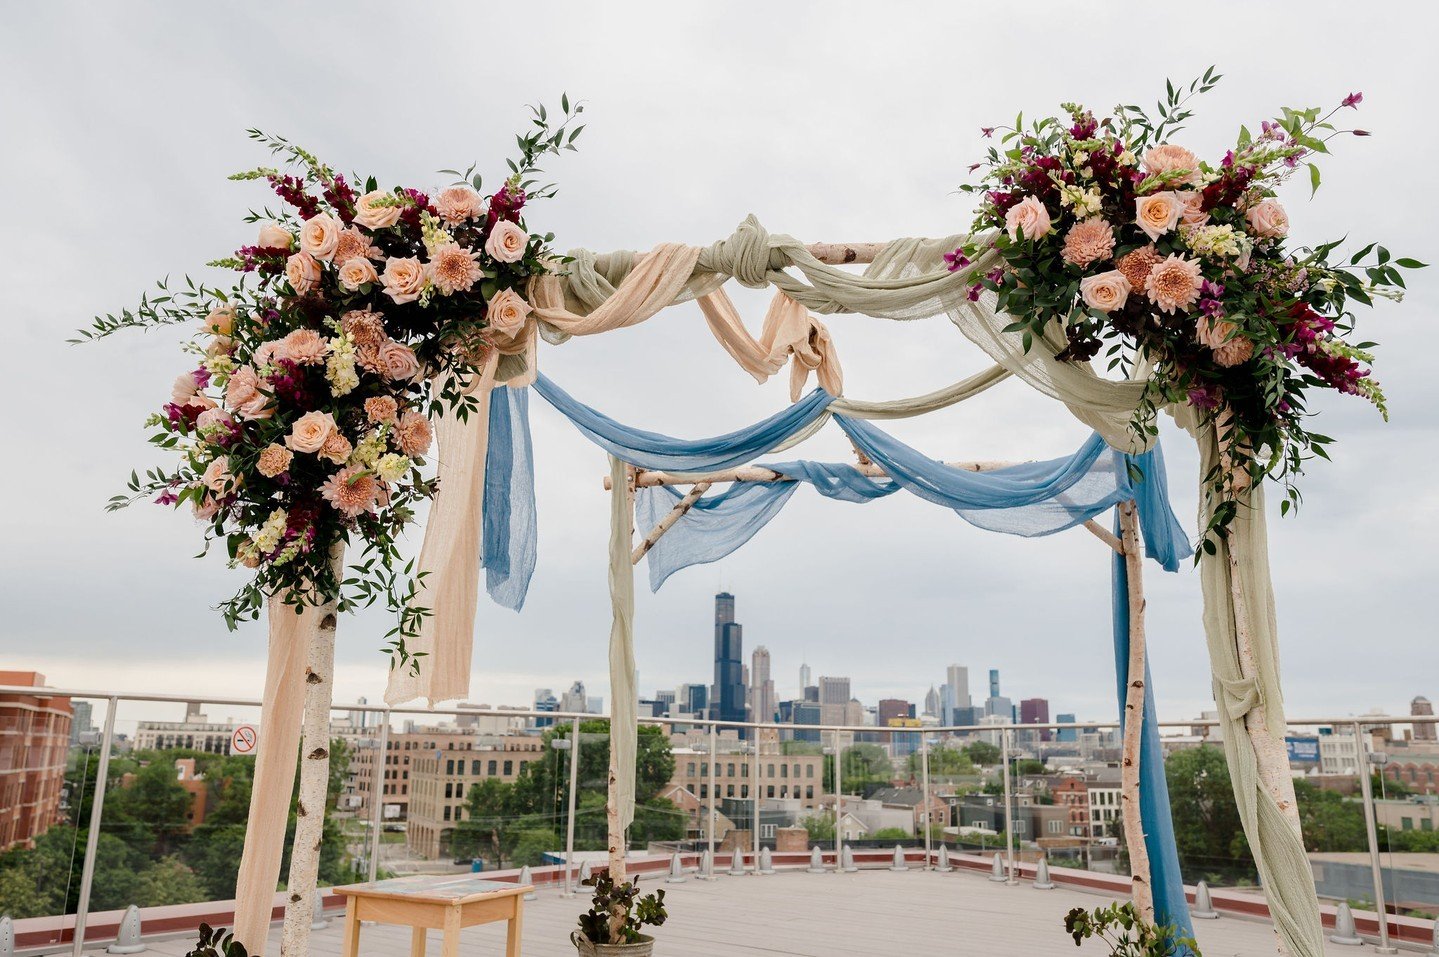 Even on a cloudy day, this view makes our hearts melt 💖

📸 @sarahnaderphotography
💐 @coachhouseplants
.
.
.
#lacunaevents #lacunalofts #chicagoeventvenue #chicagowedding #rooftopwedding #weddingphotography #ChicagoWeddings #ChicagoEvents #brideins